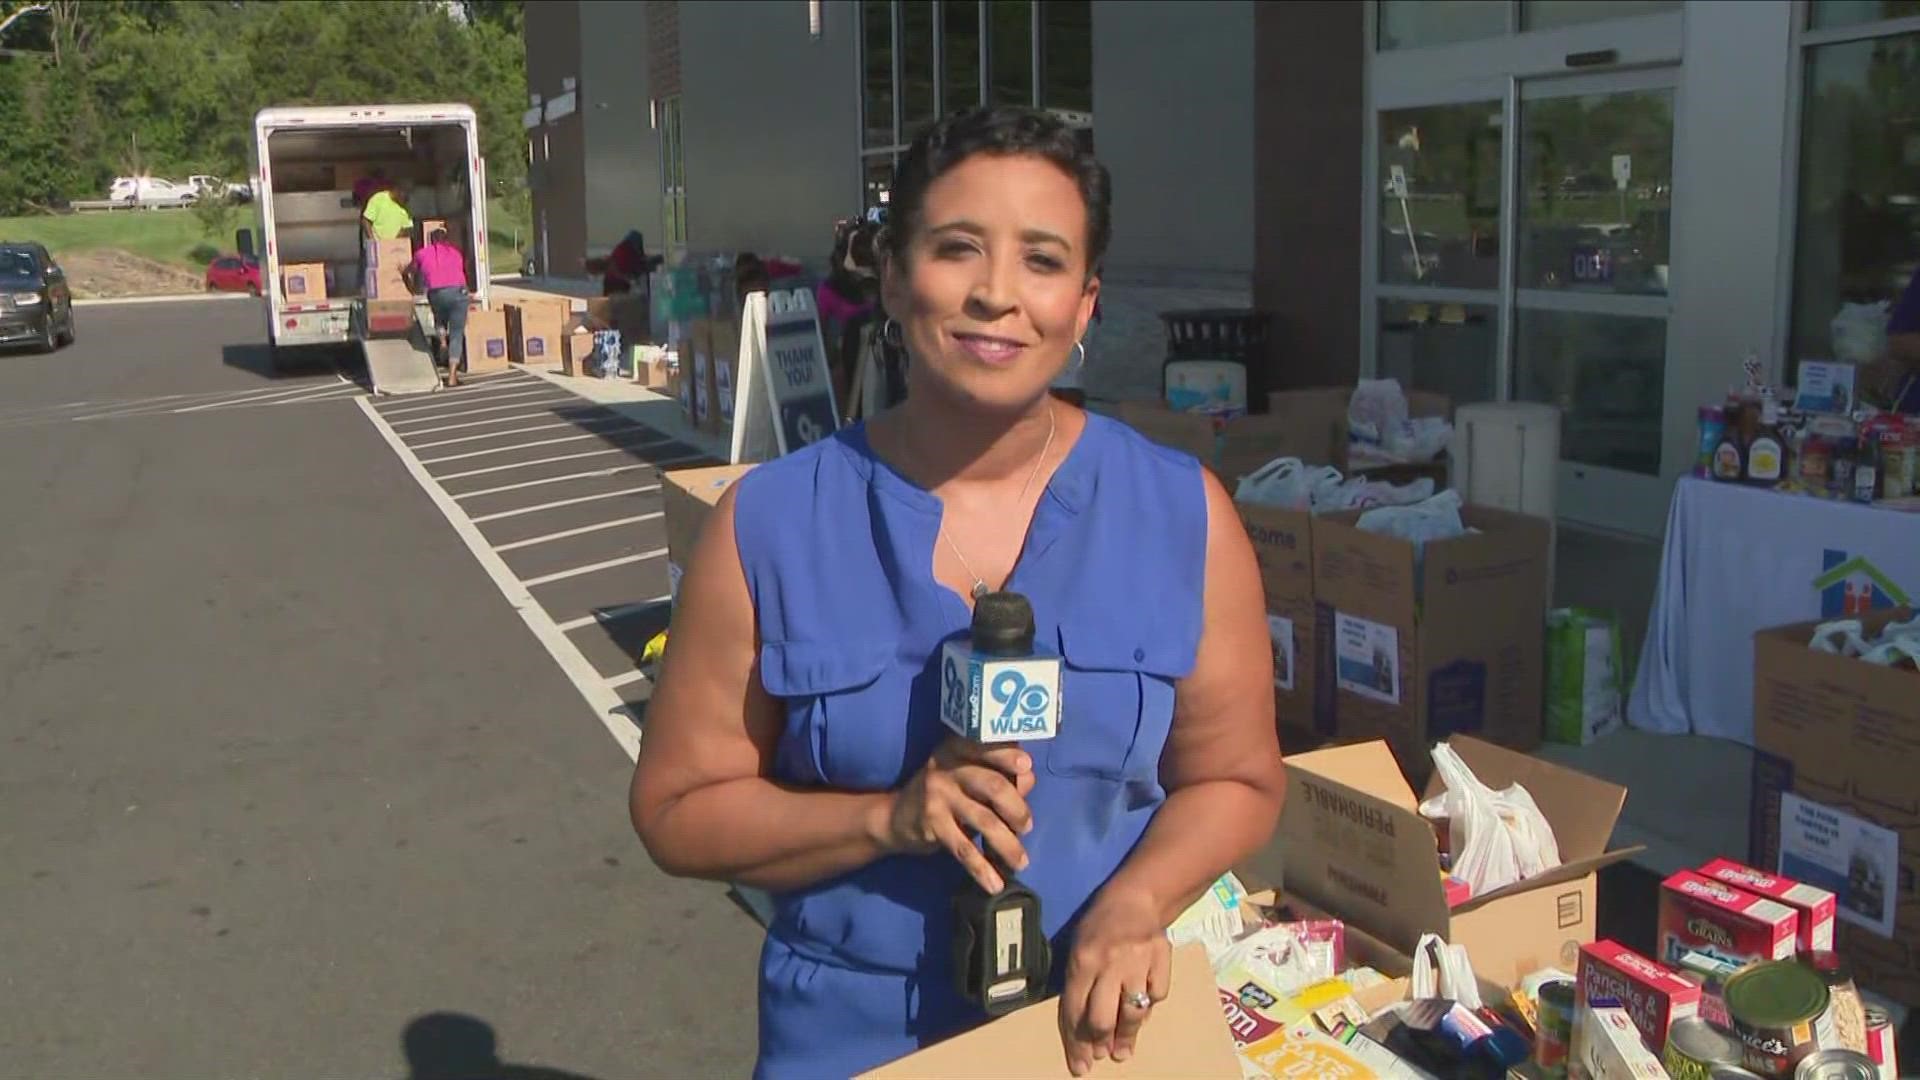 As part of a 6-week #GivingMatters campaign, WUSA9 is hosting food donations across the DMV to help feed families in Prince George's County.